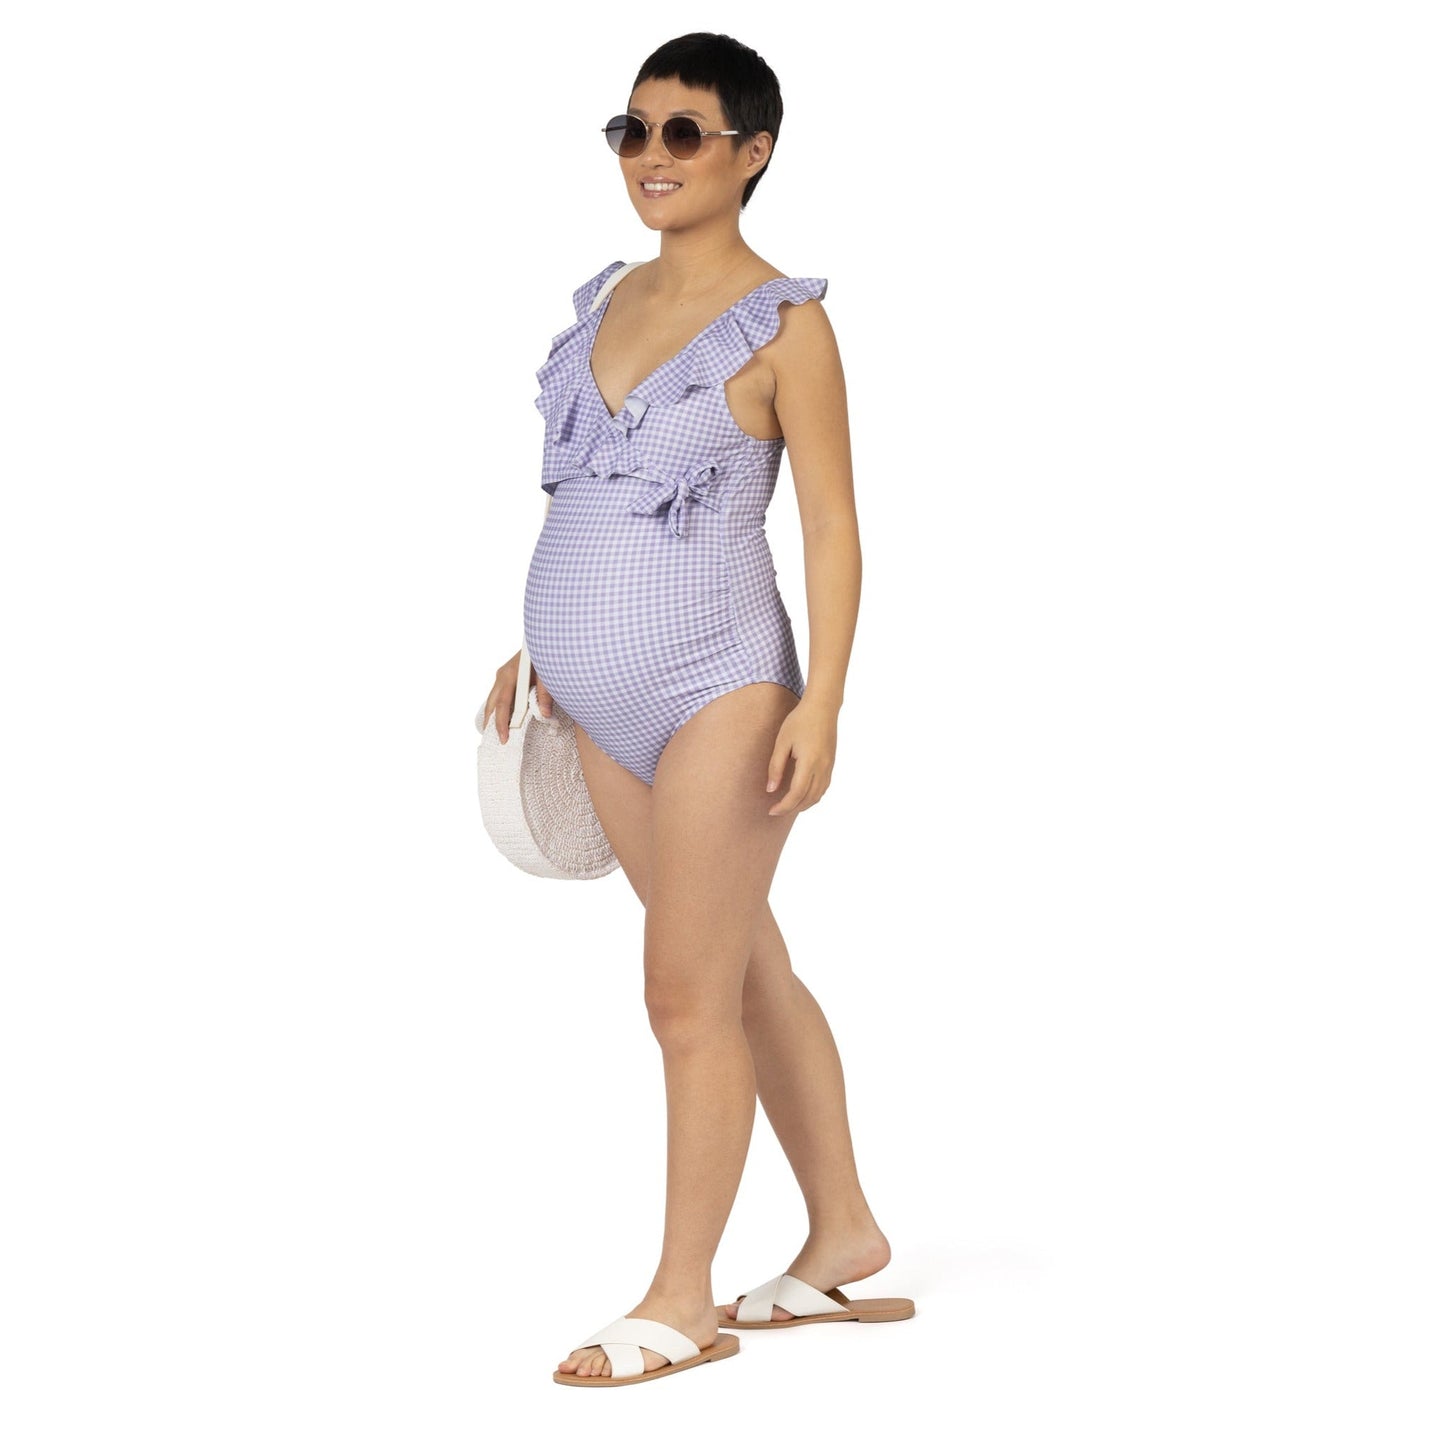 Pregnant model wearing the Ruffle Wrap Maternity & Nursing One Piece Swimsuit in Lavender Gingham @model_info:Lan is wearing a Small Regular.